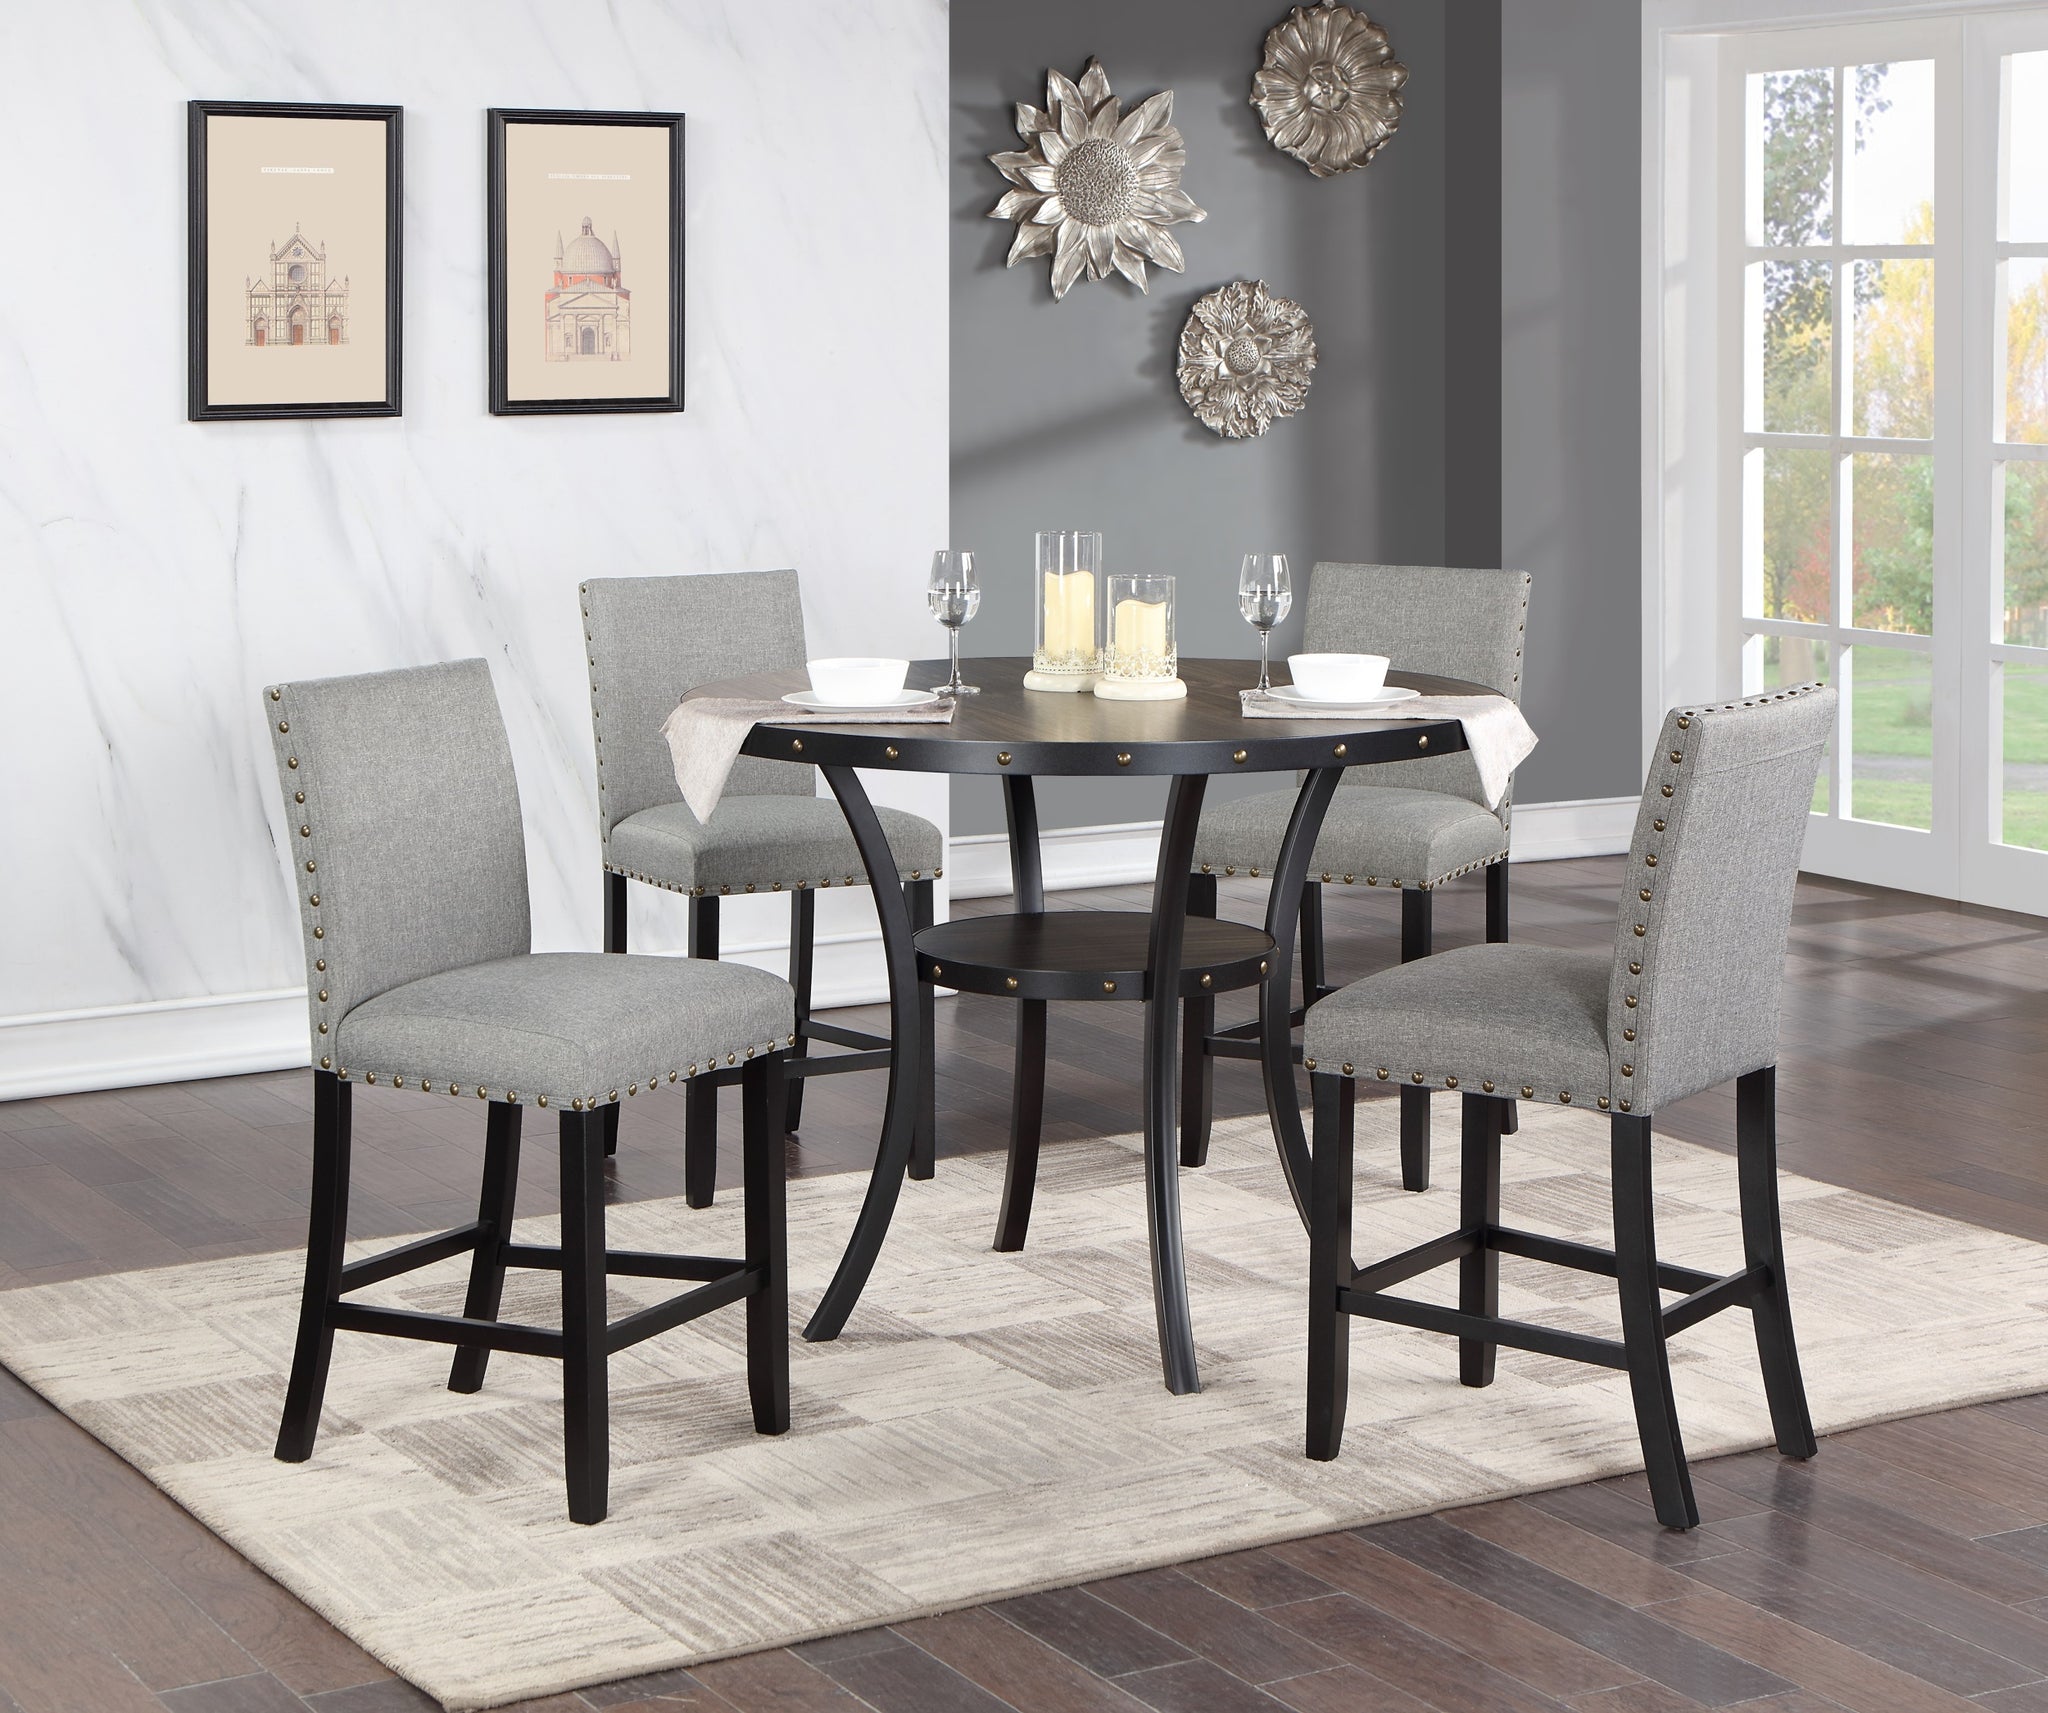 Dining Room Furniture Natural Wooden Round Dining wood-dining room-rubberwood-round-dining table